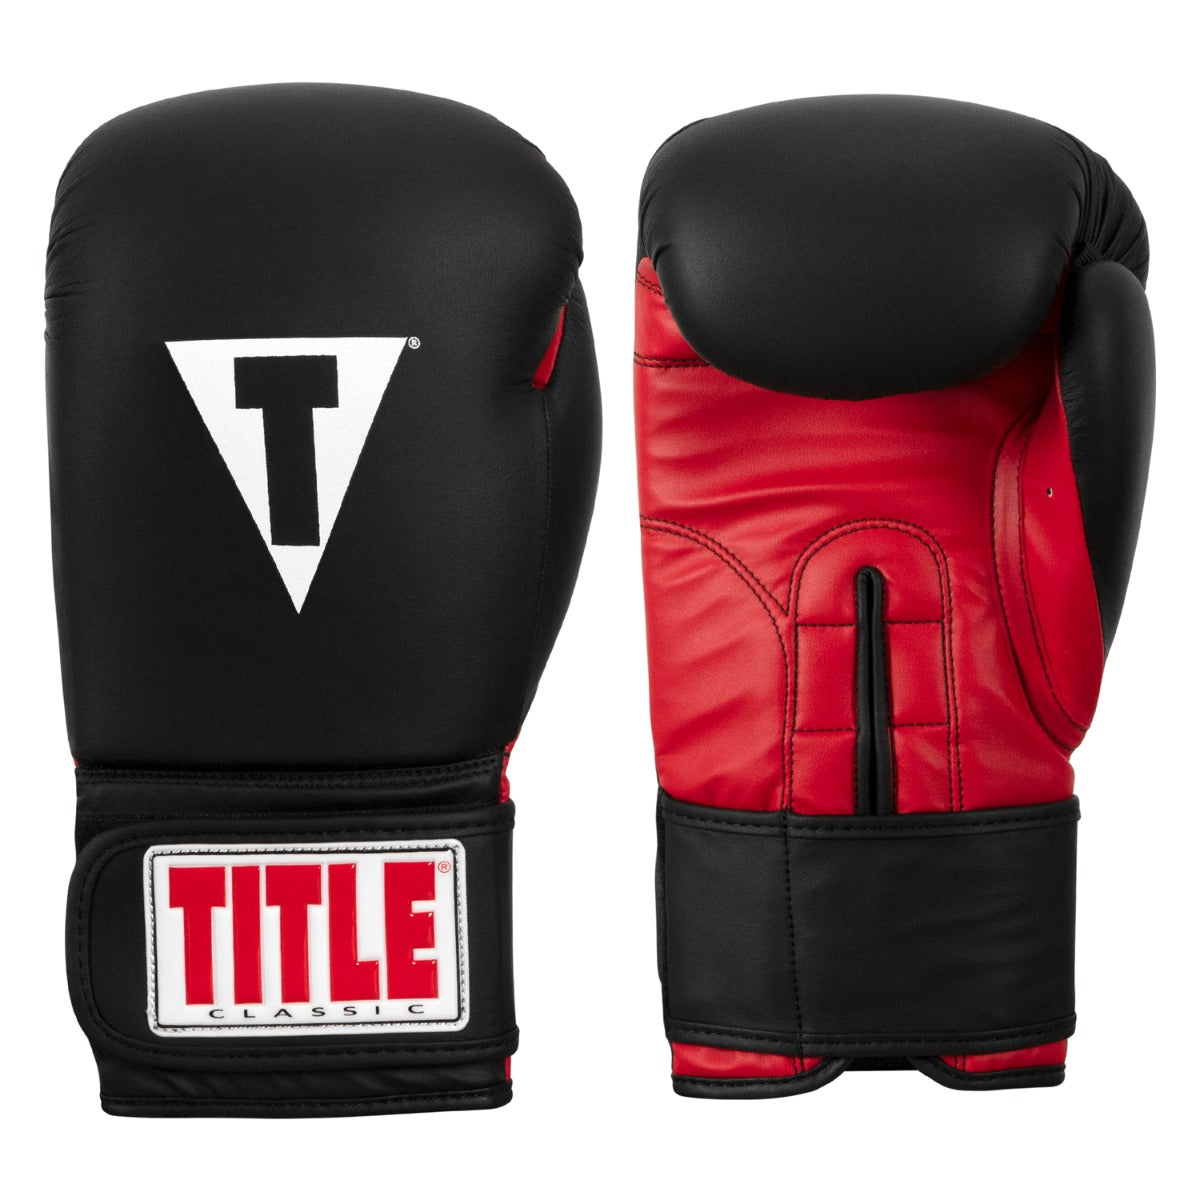 TITLE Classic Fitness Boxing Gloves